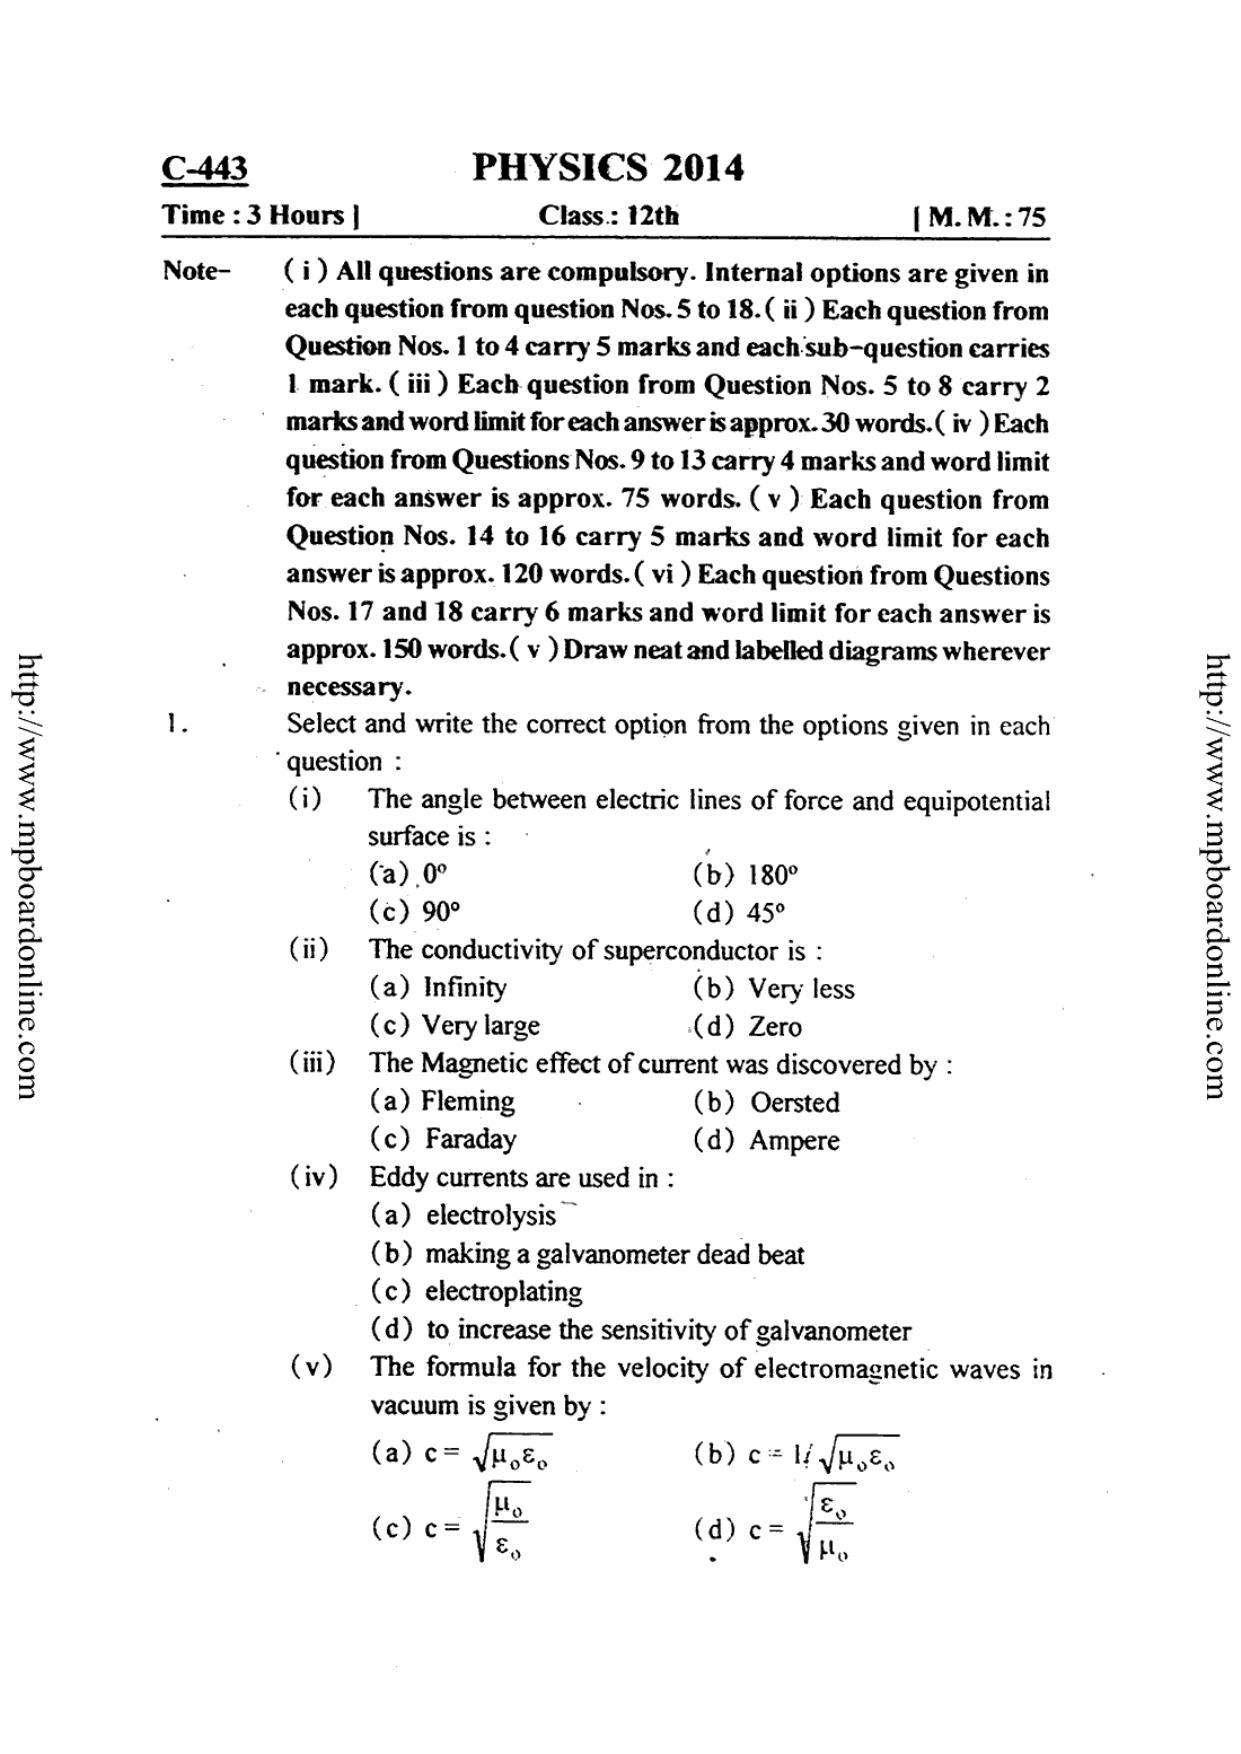 MP Board Class 12 Physics (English Medium) 2014 Question Paper - Page 1